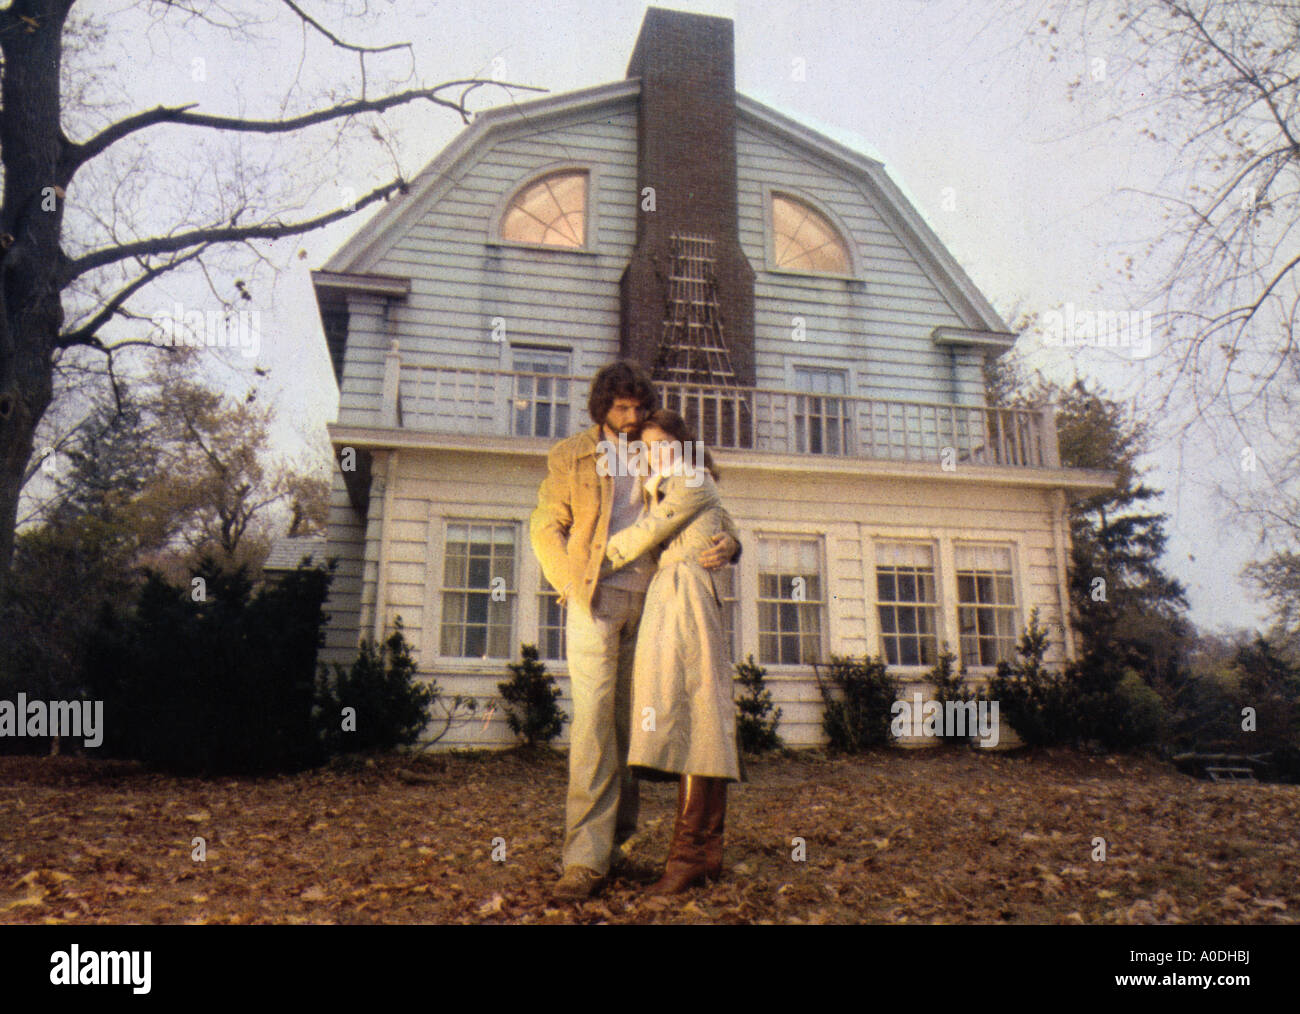 AMITYVILLE HORROR 1979 AIP film with James Brolin and Margot Kidder Stock Photo